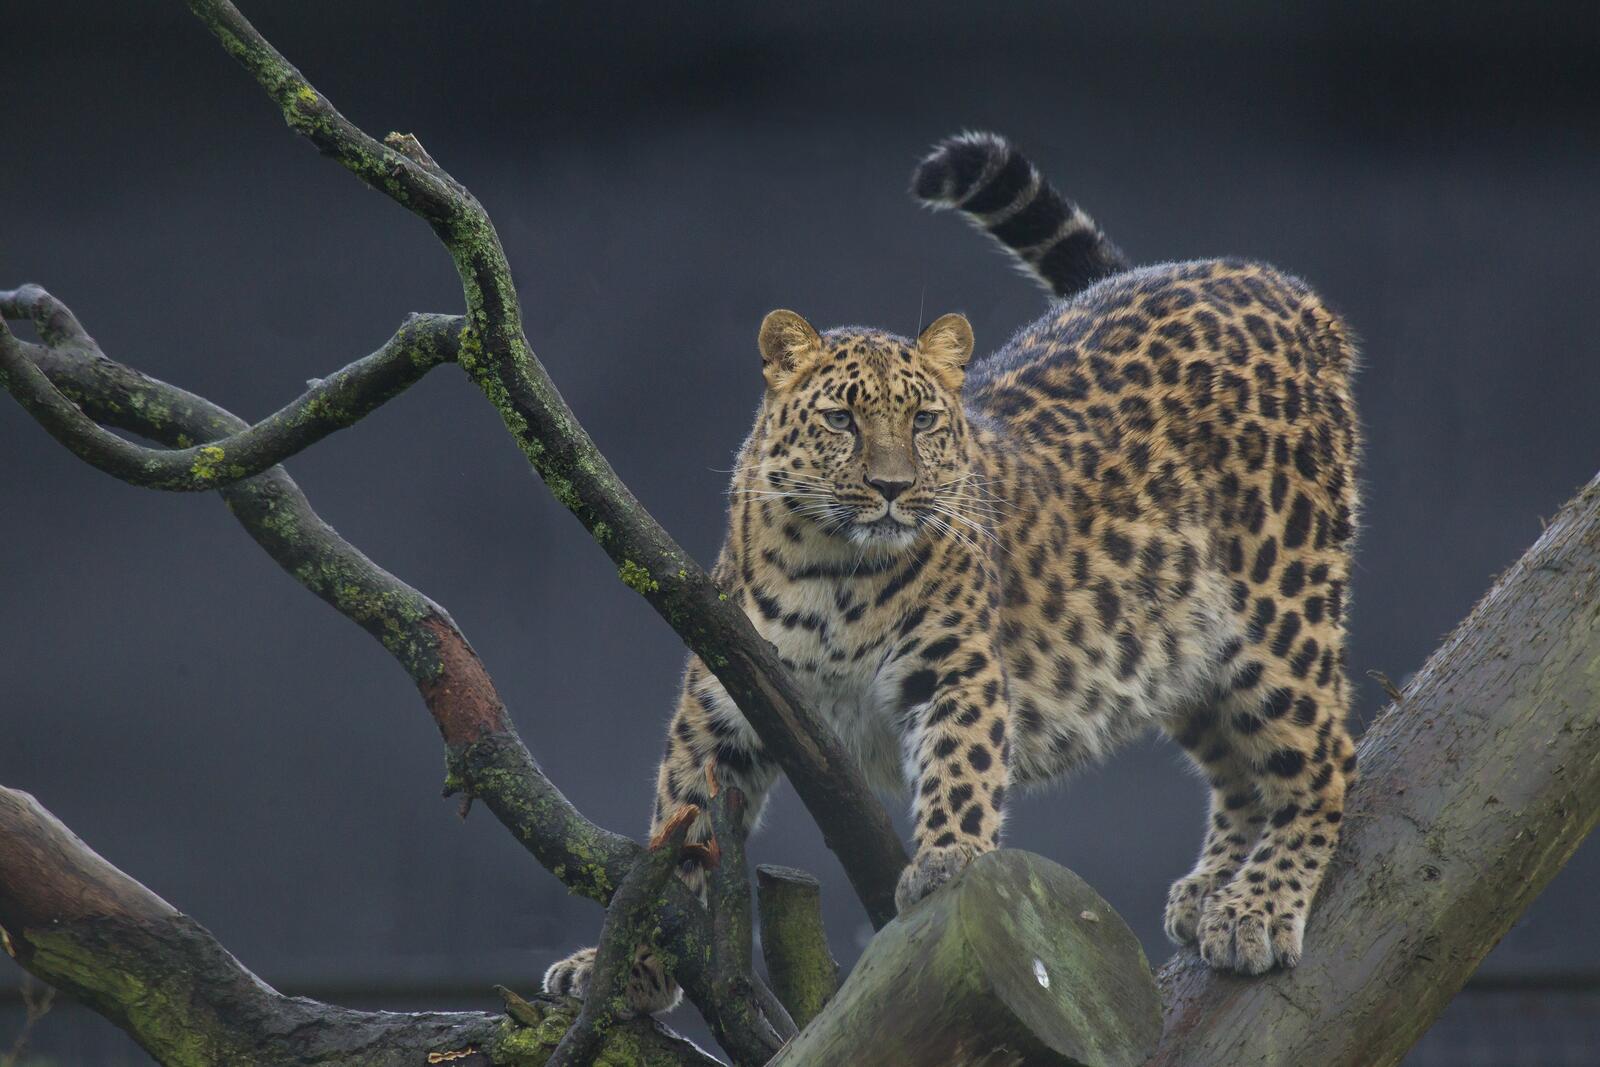 Wallpapers Leopard the kind of predatory mammals of the cat family the animal on the desktop